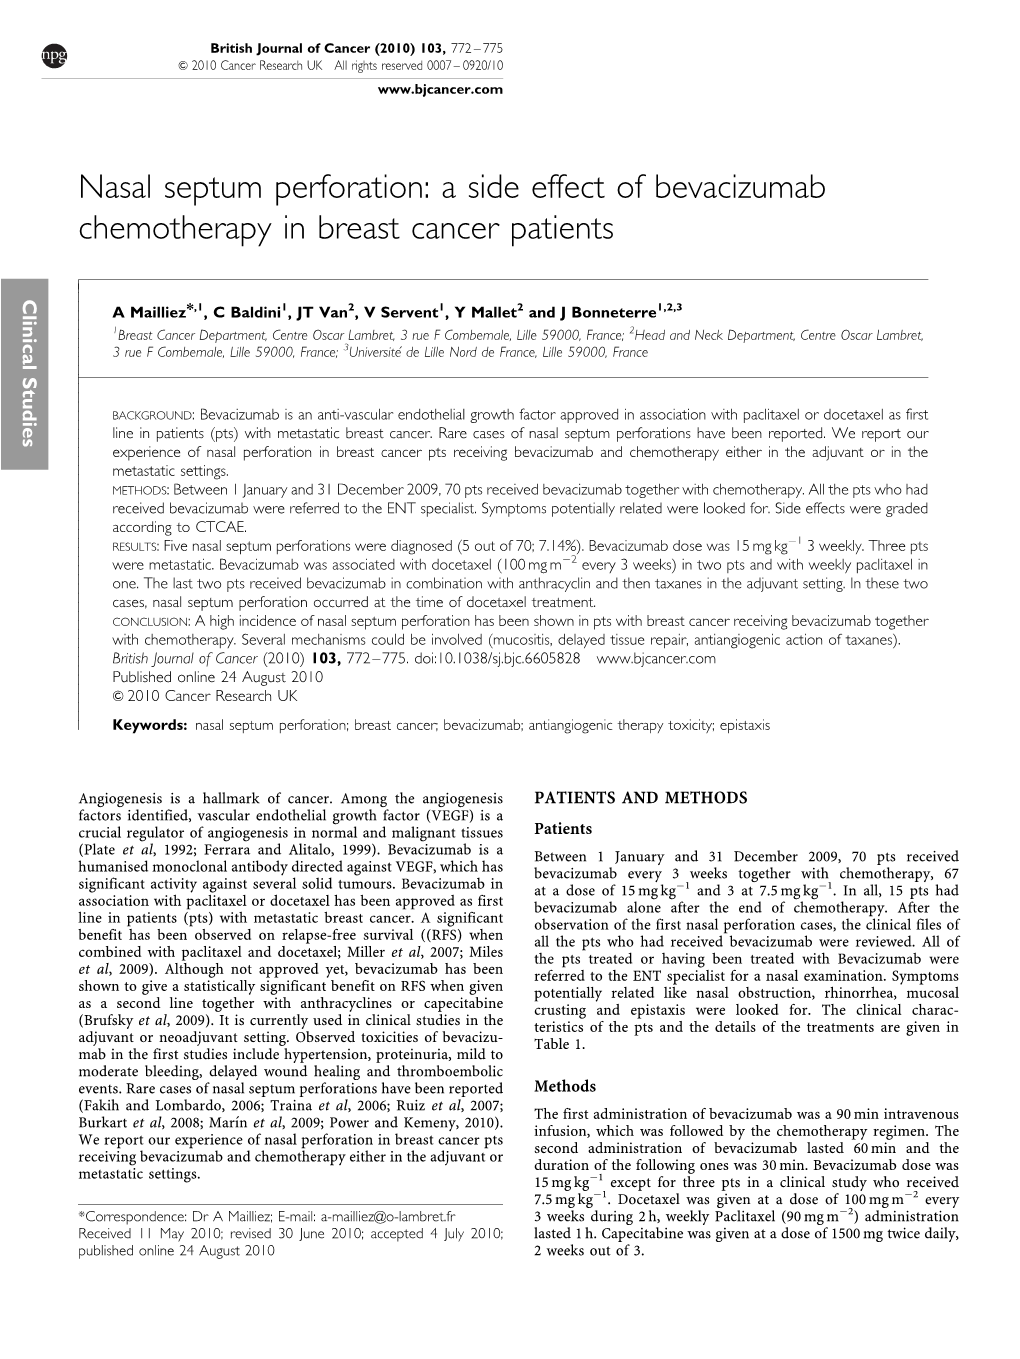 Nasal Septum Perforation: a Side Effect of Bevacizumab Chemotherapy in Breast Cancer Patients